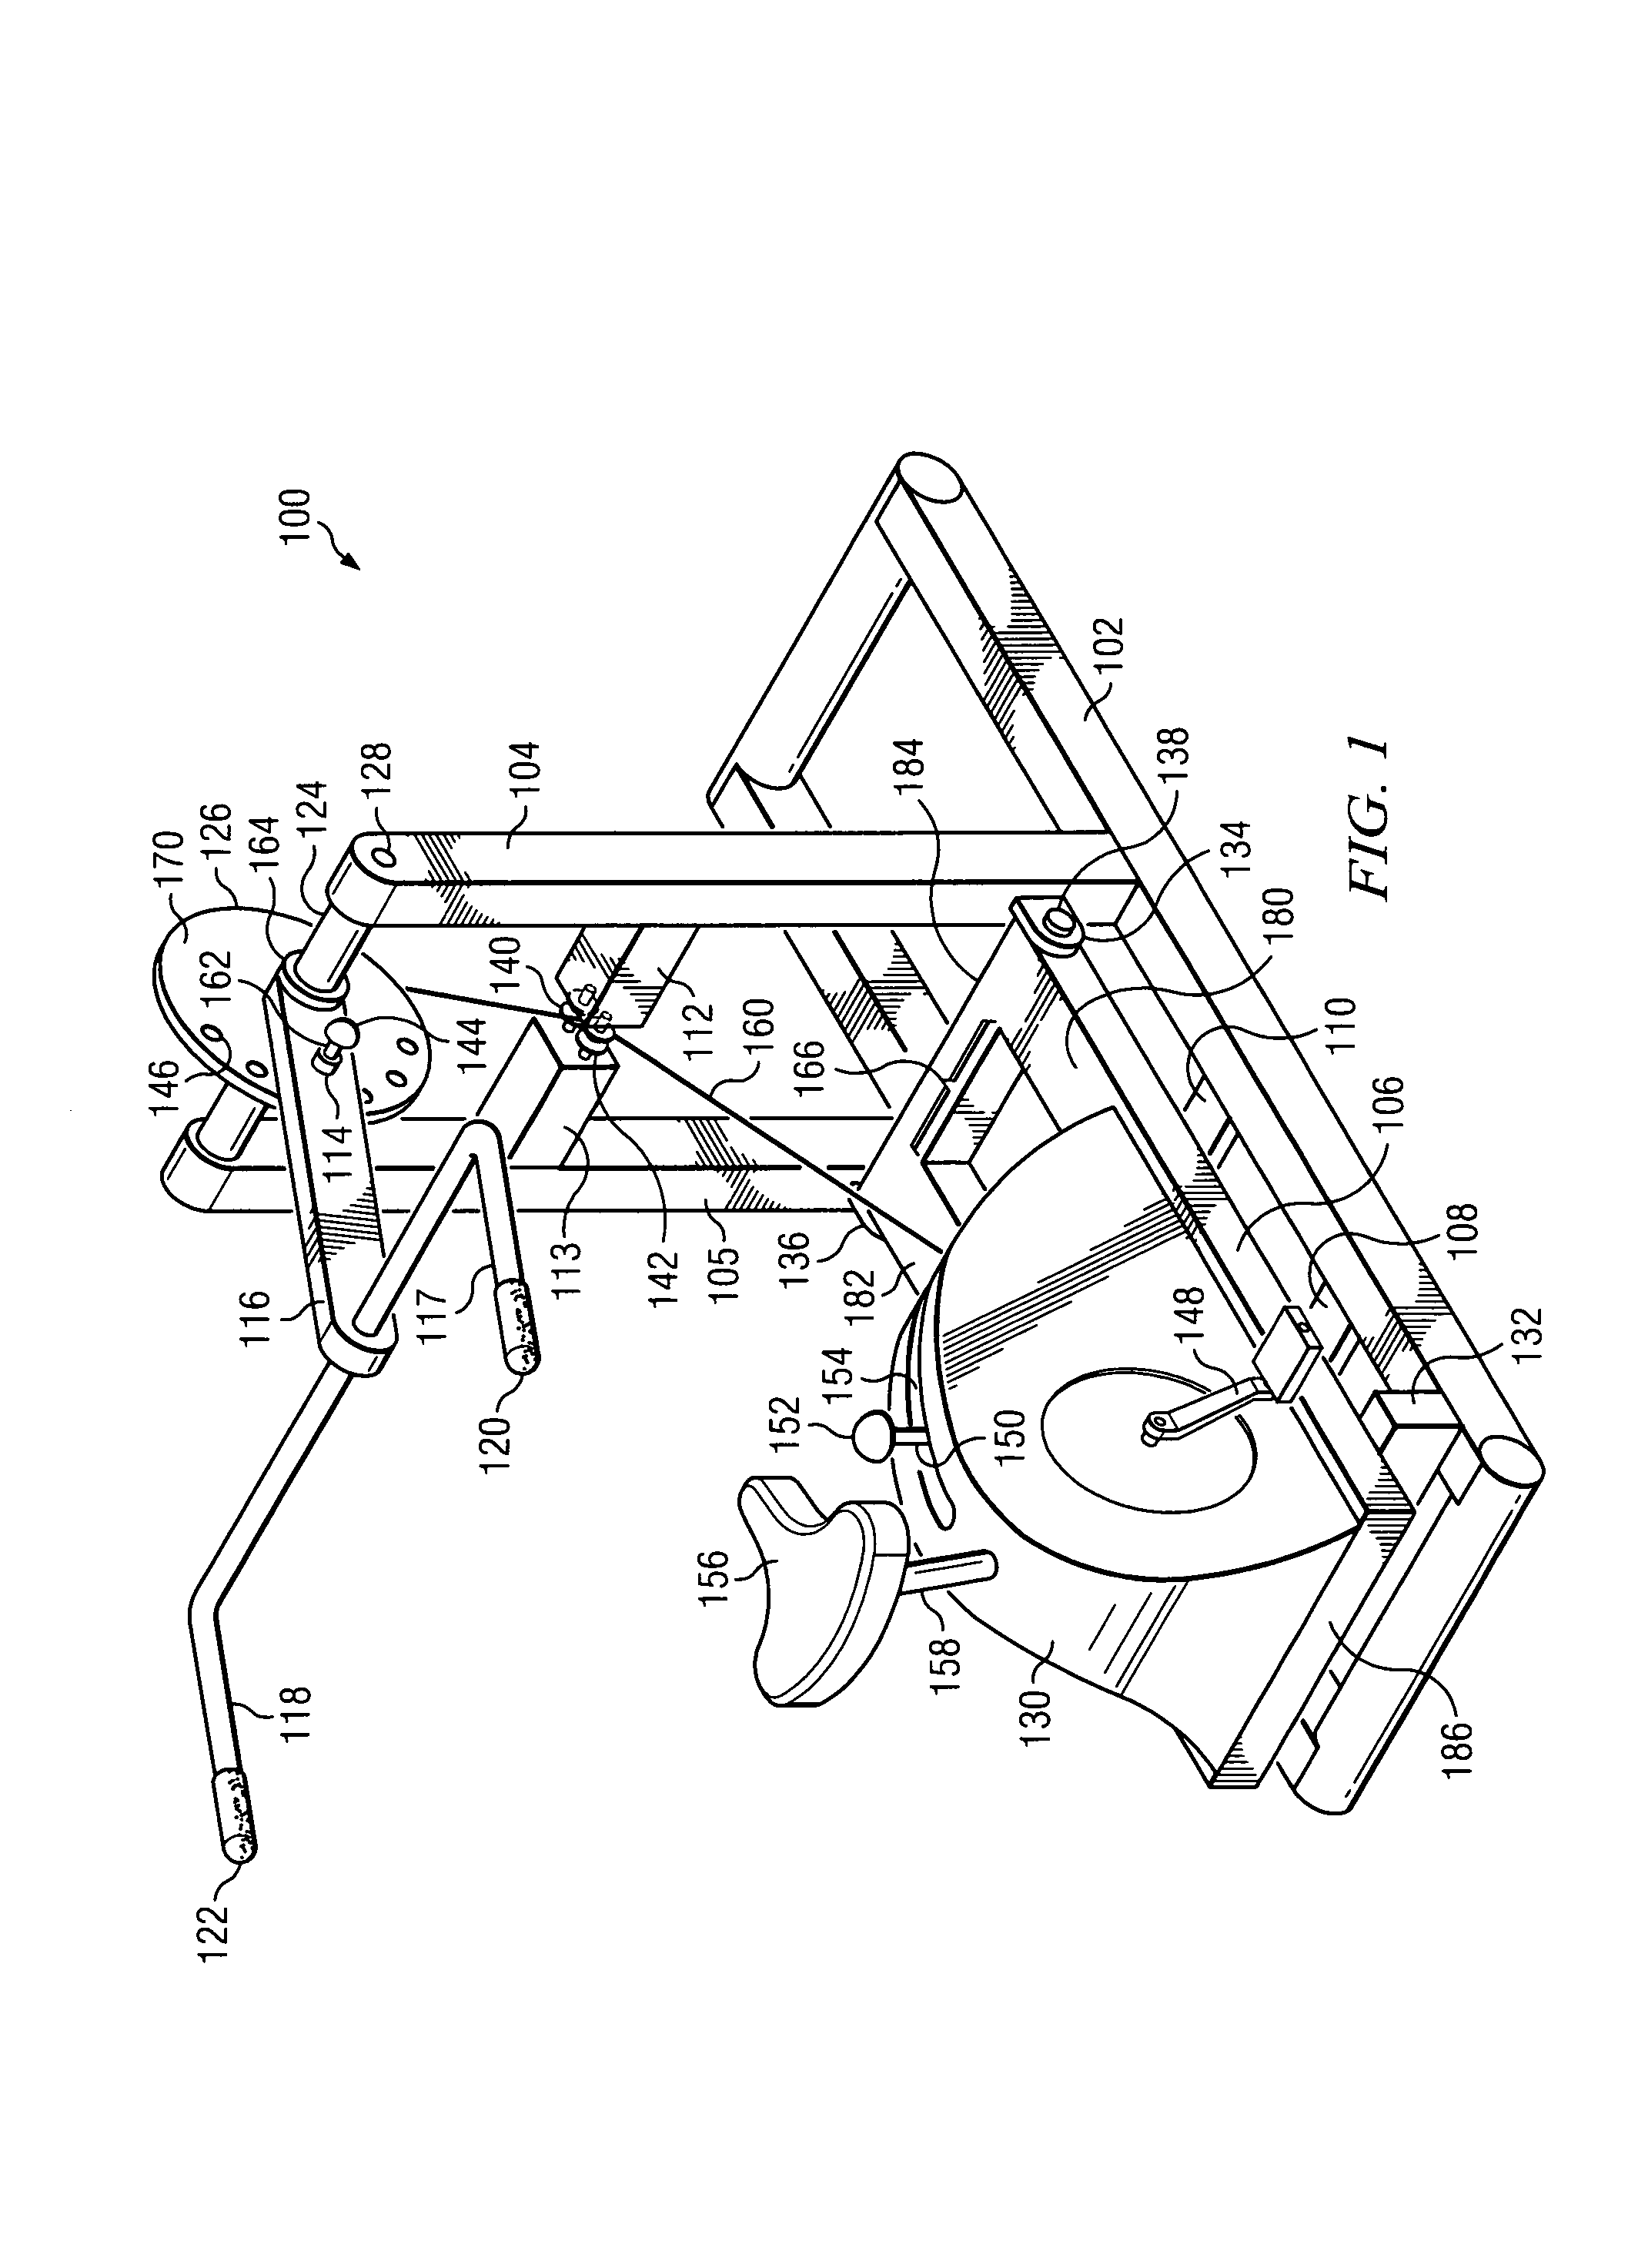 Multimotion exercise apparatus and method